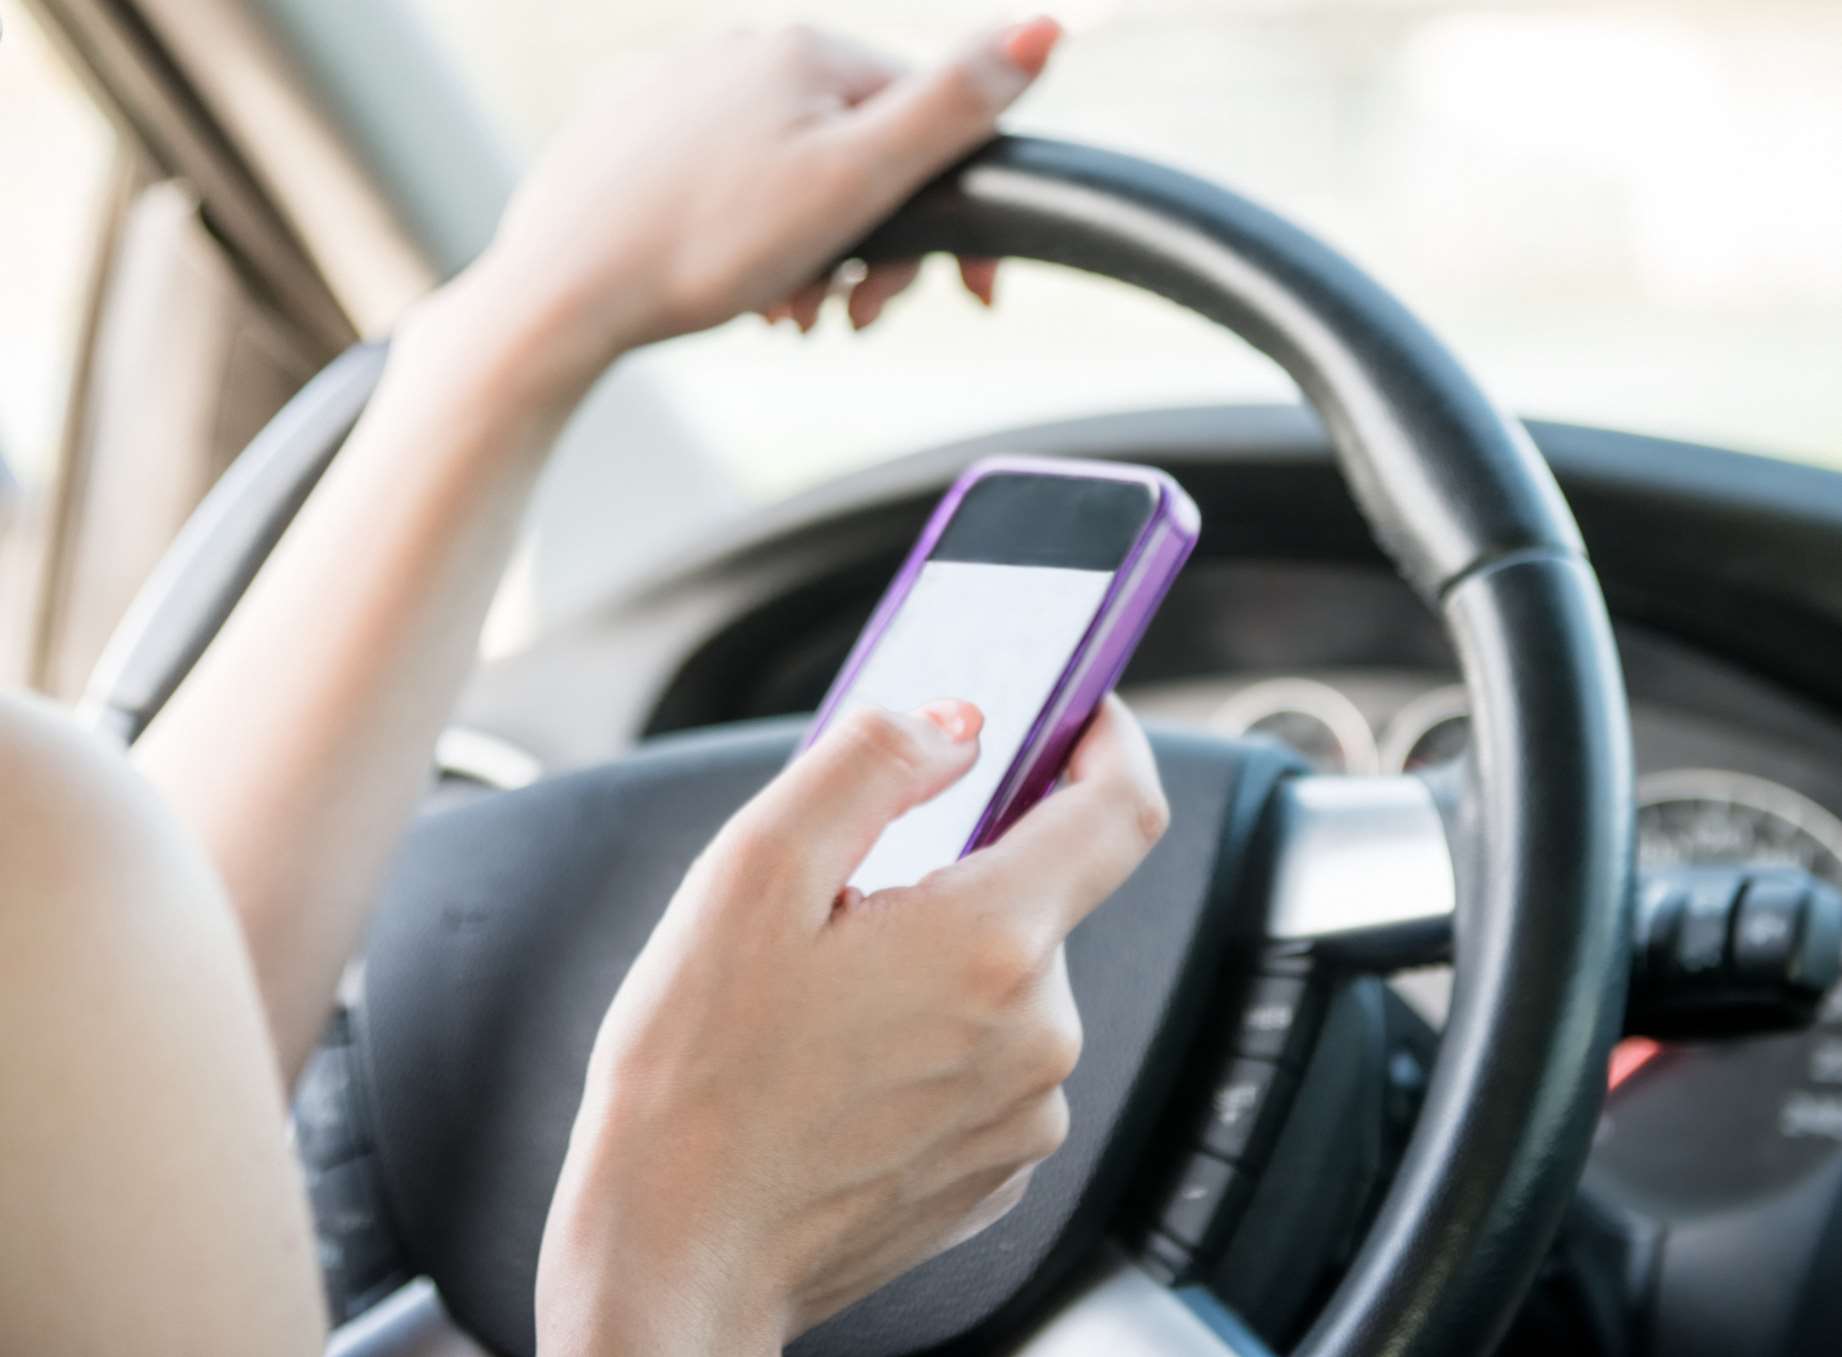 The number of penalty notices for people who use phones at the wheel has dropped